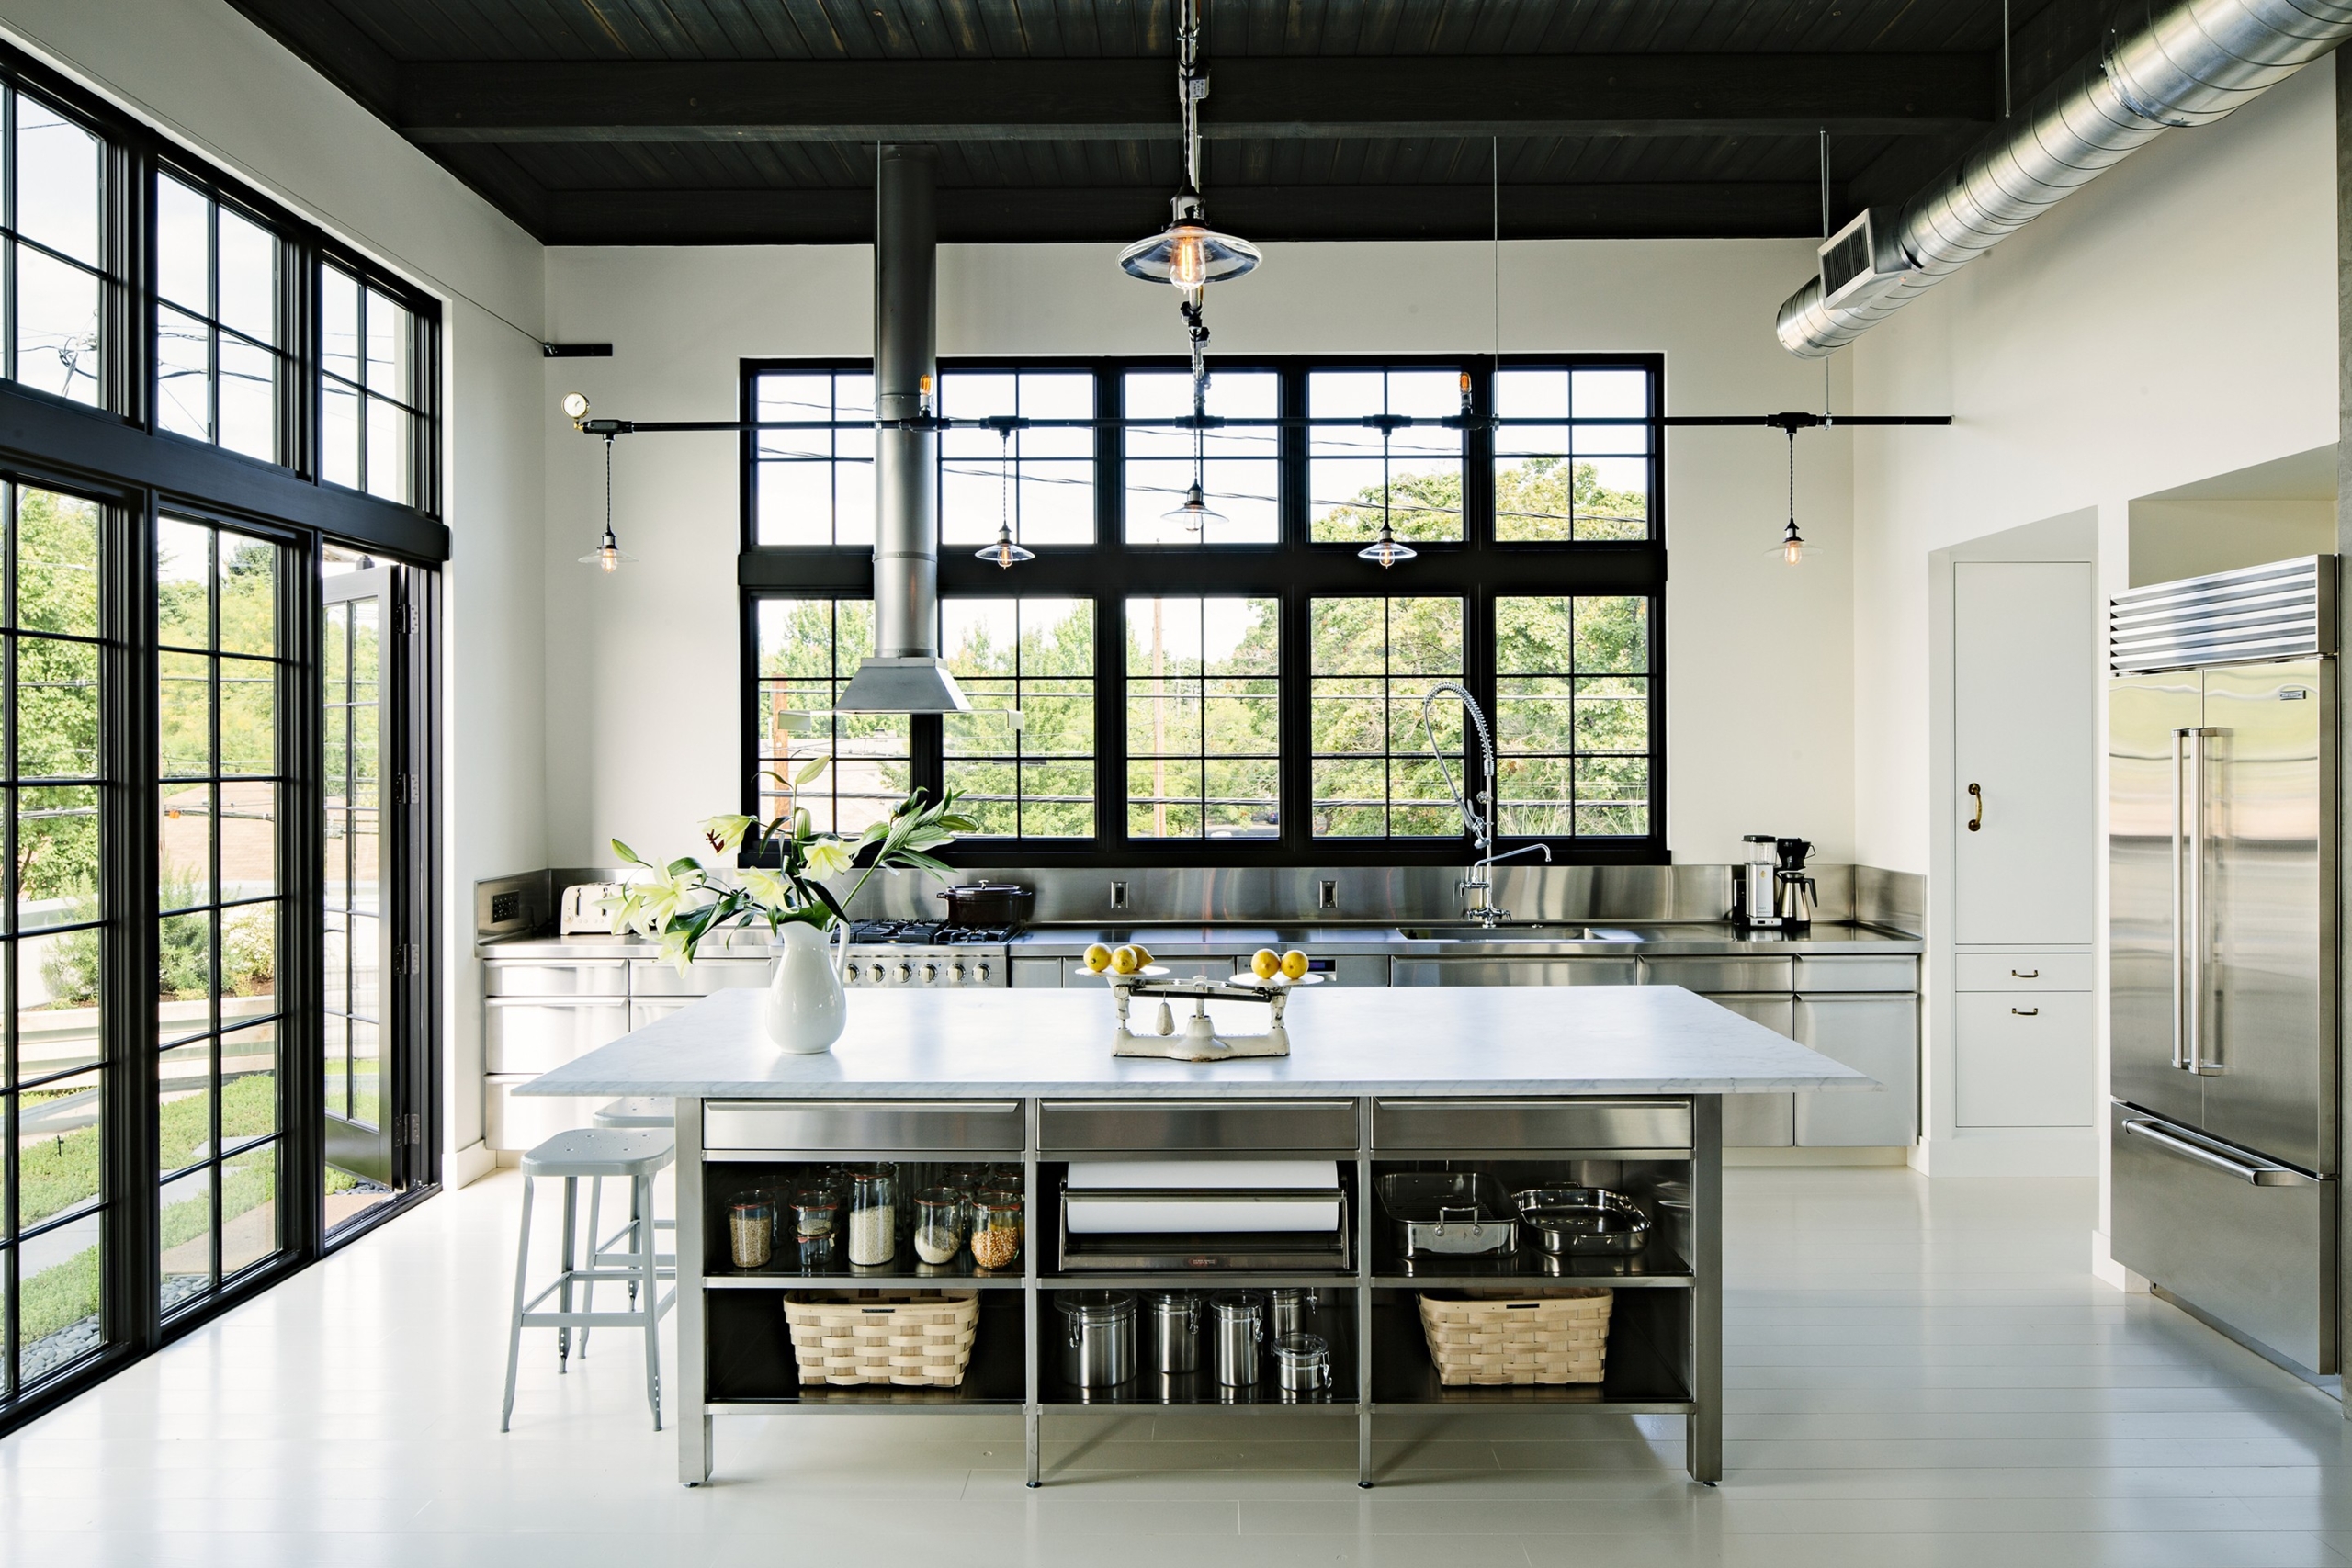 33 Industrial Kitchen Ideas for a Charming Raw Feel - Foter